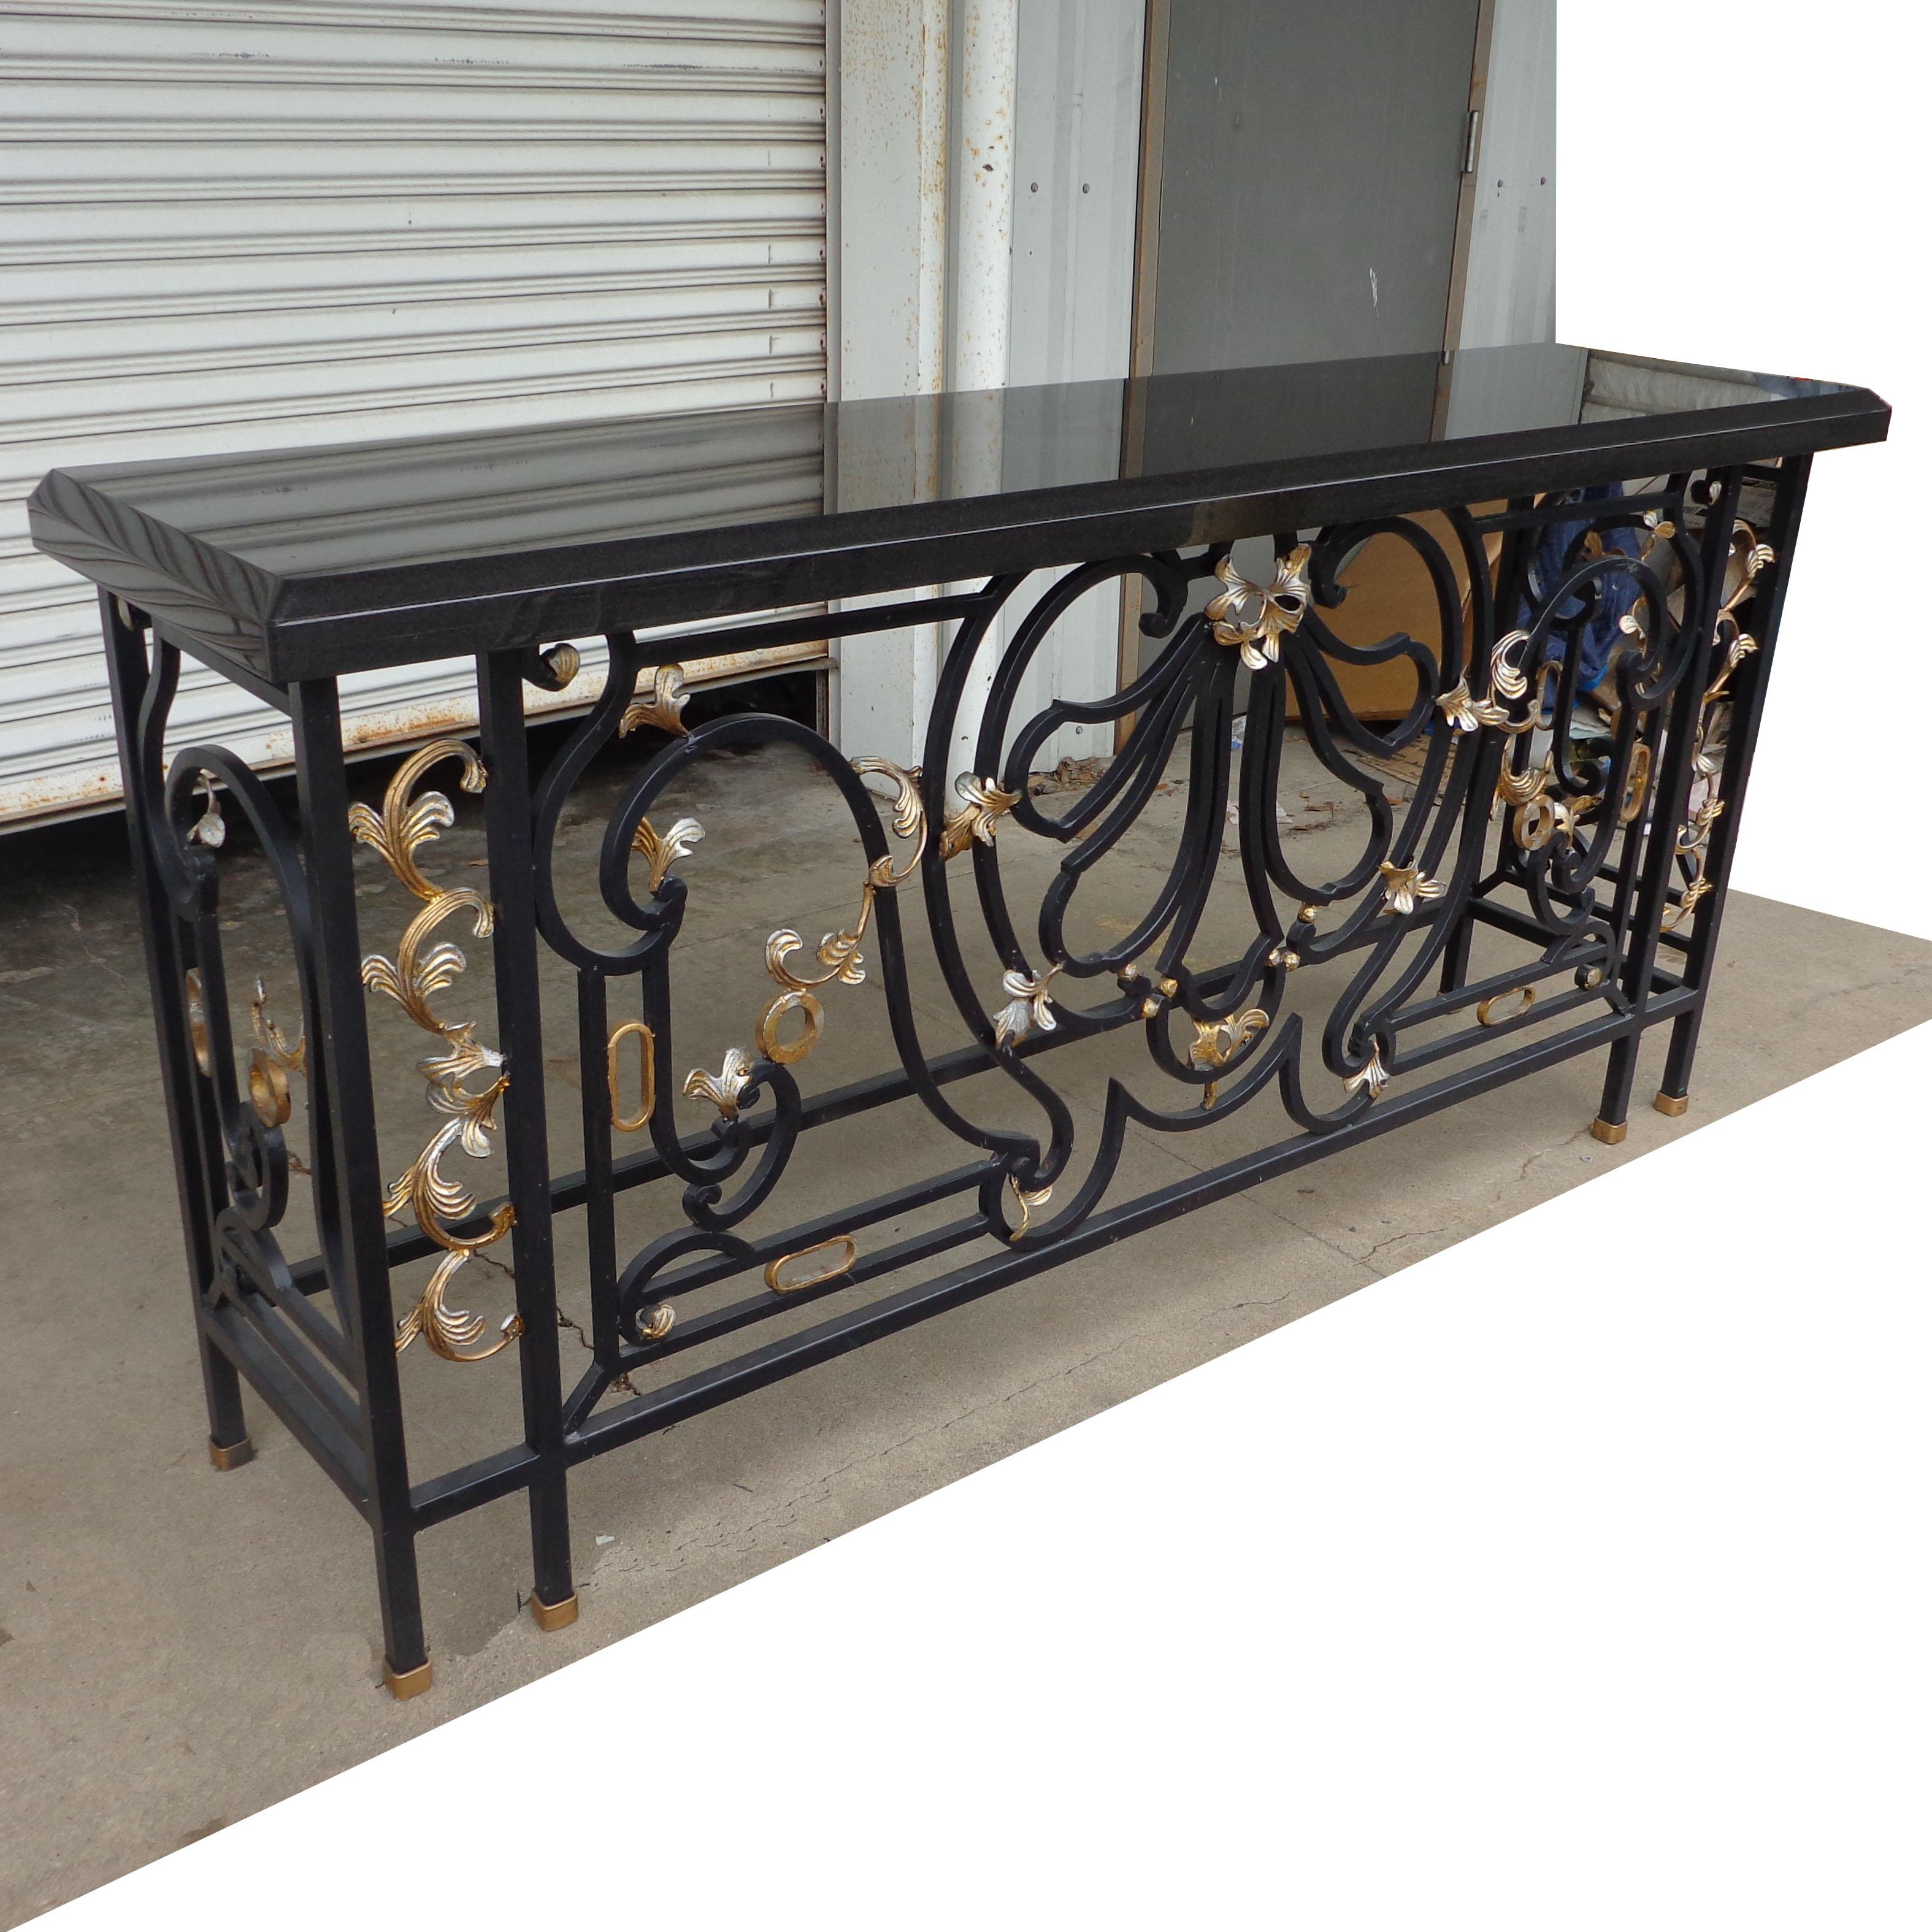 Vintage granite wrought iron console. Measure: 6ft.

Scrolled wrought iron base adorned with gilt leaf accents. Top is a rich black granite. 



 